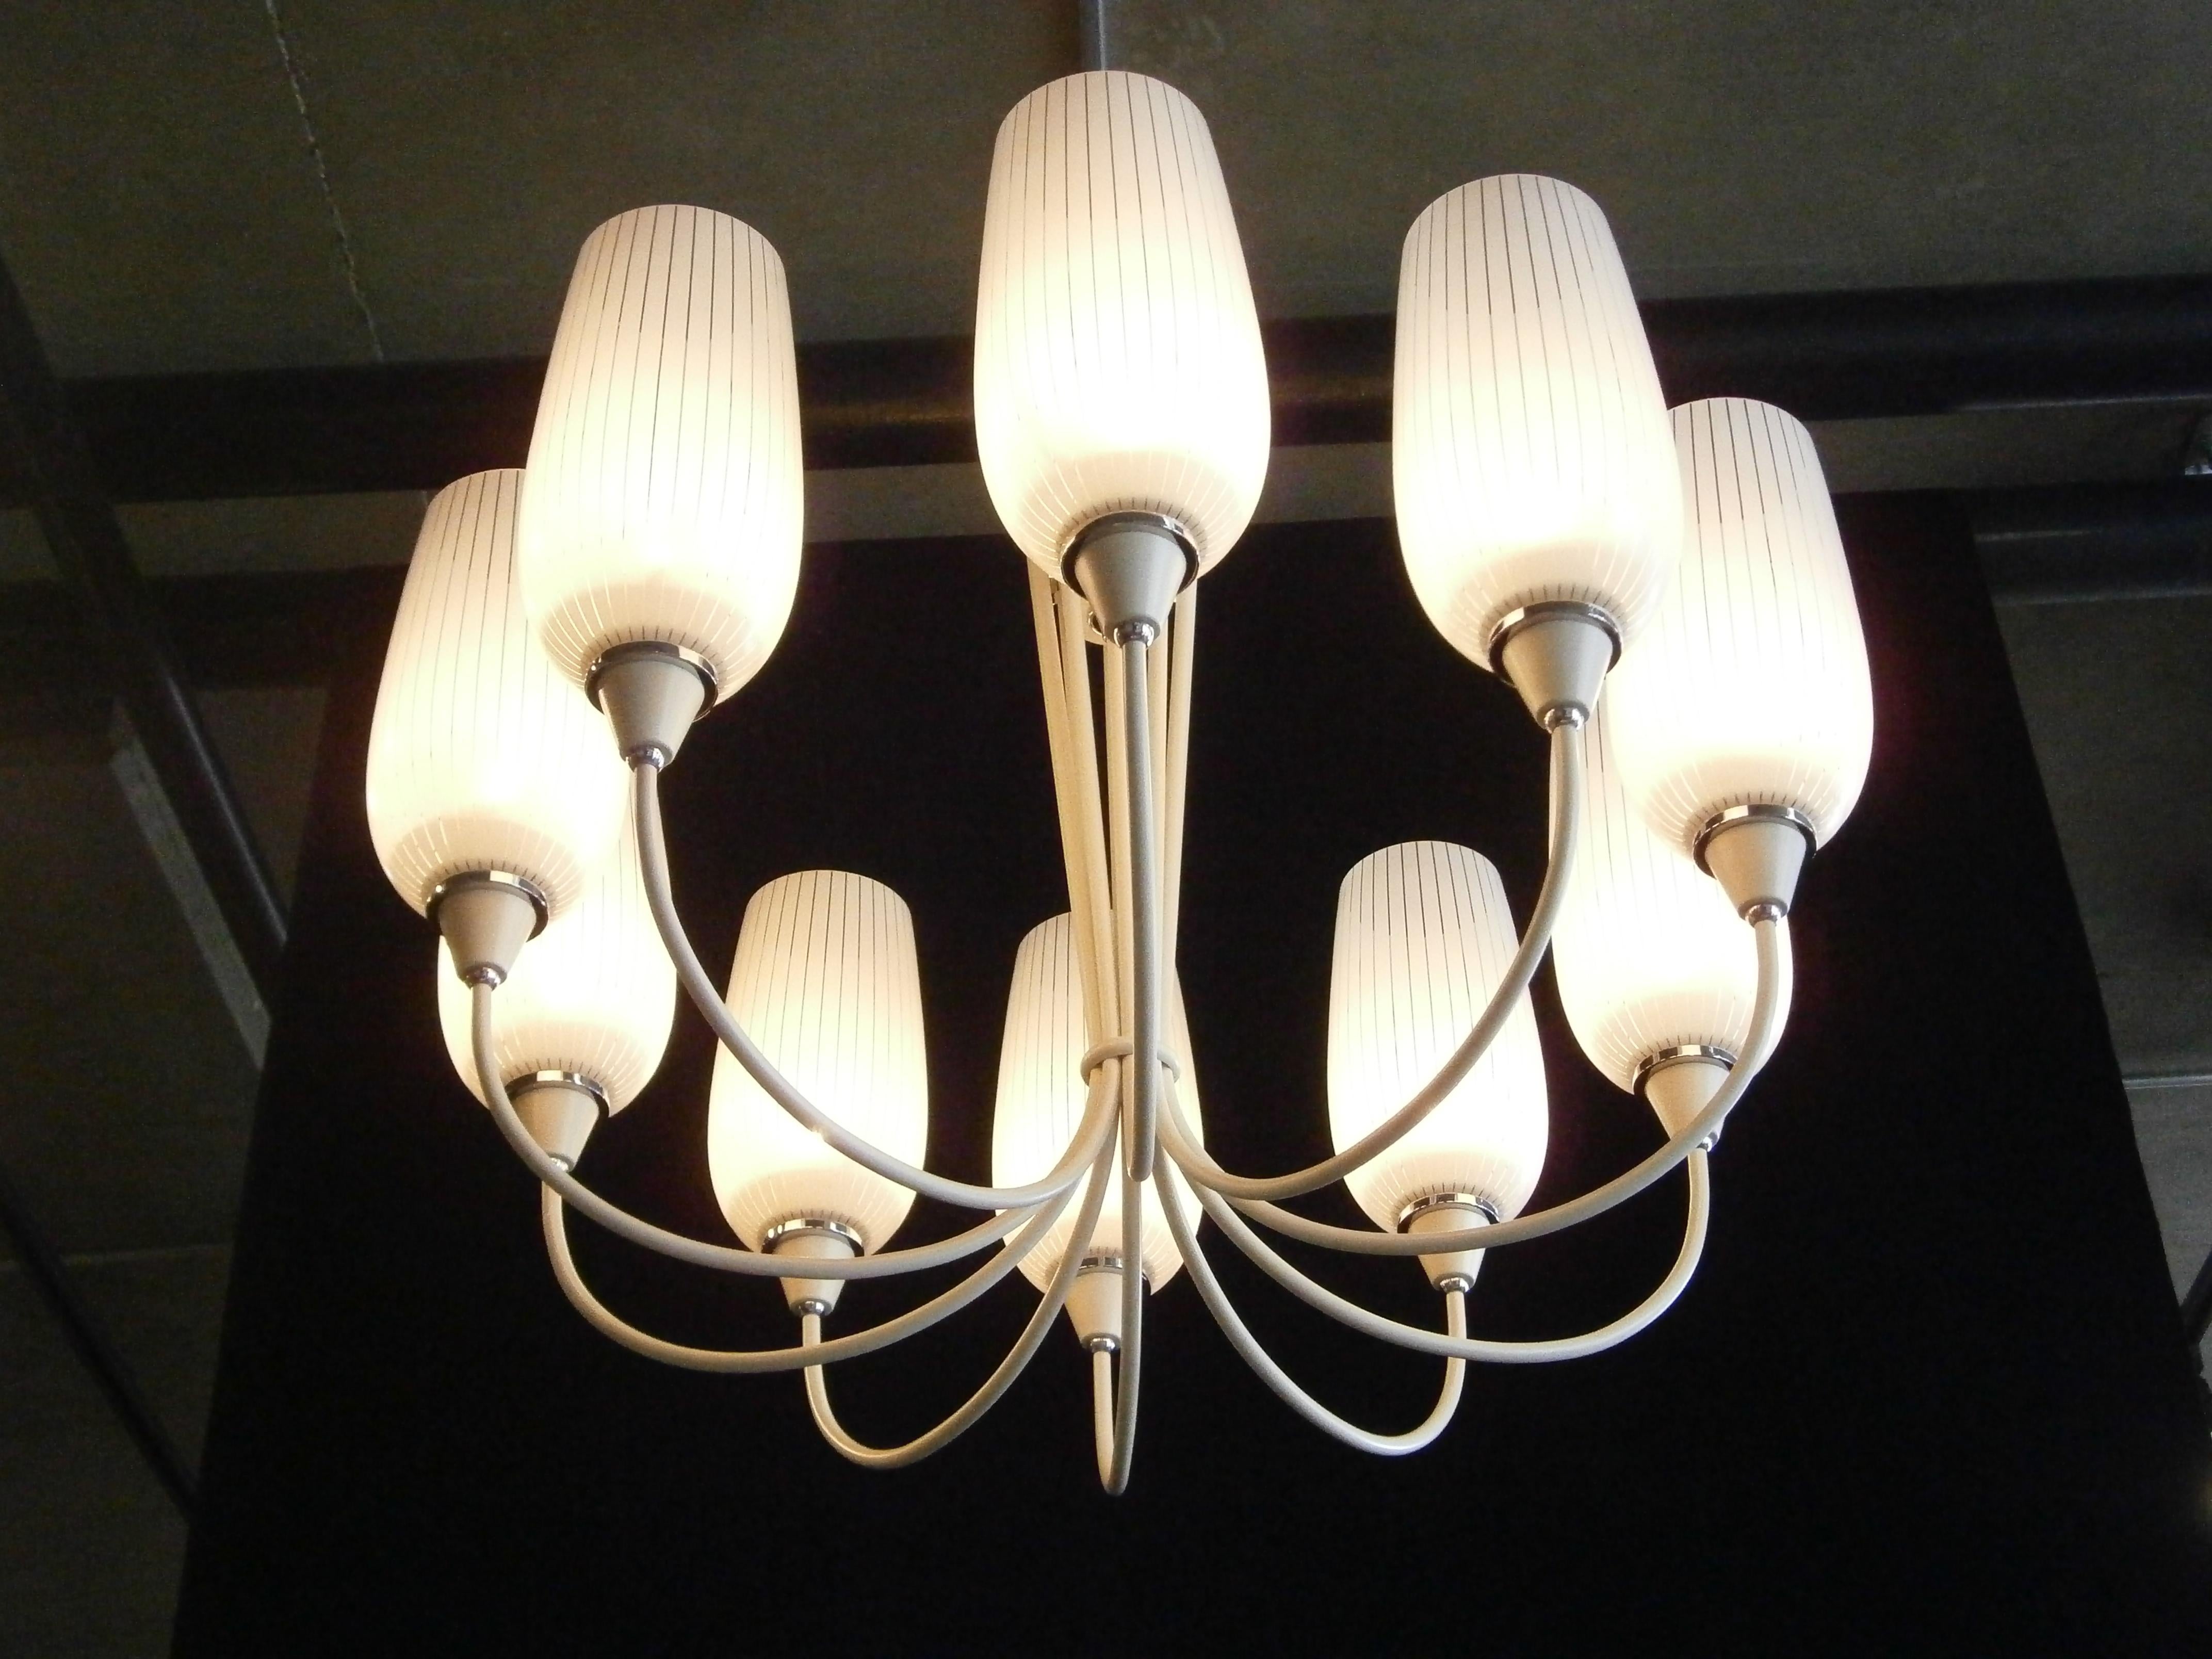 An elegant Italian midcentury painted and nickel-plated ten-arm chandelier with original Murano glass shades. The body and arms are painted a creamy white and the metal accents are finished in a polished nickel plate. The striped Murano glass shades